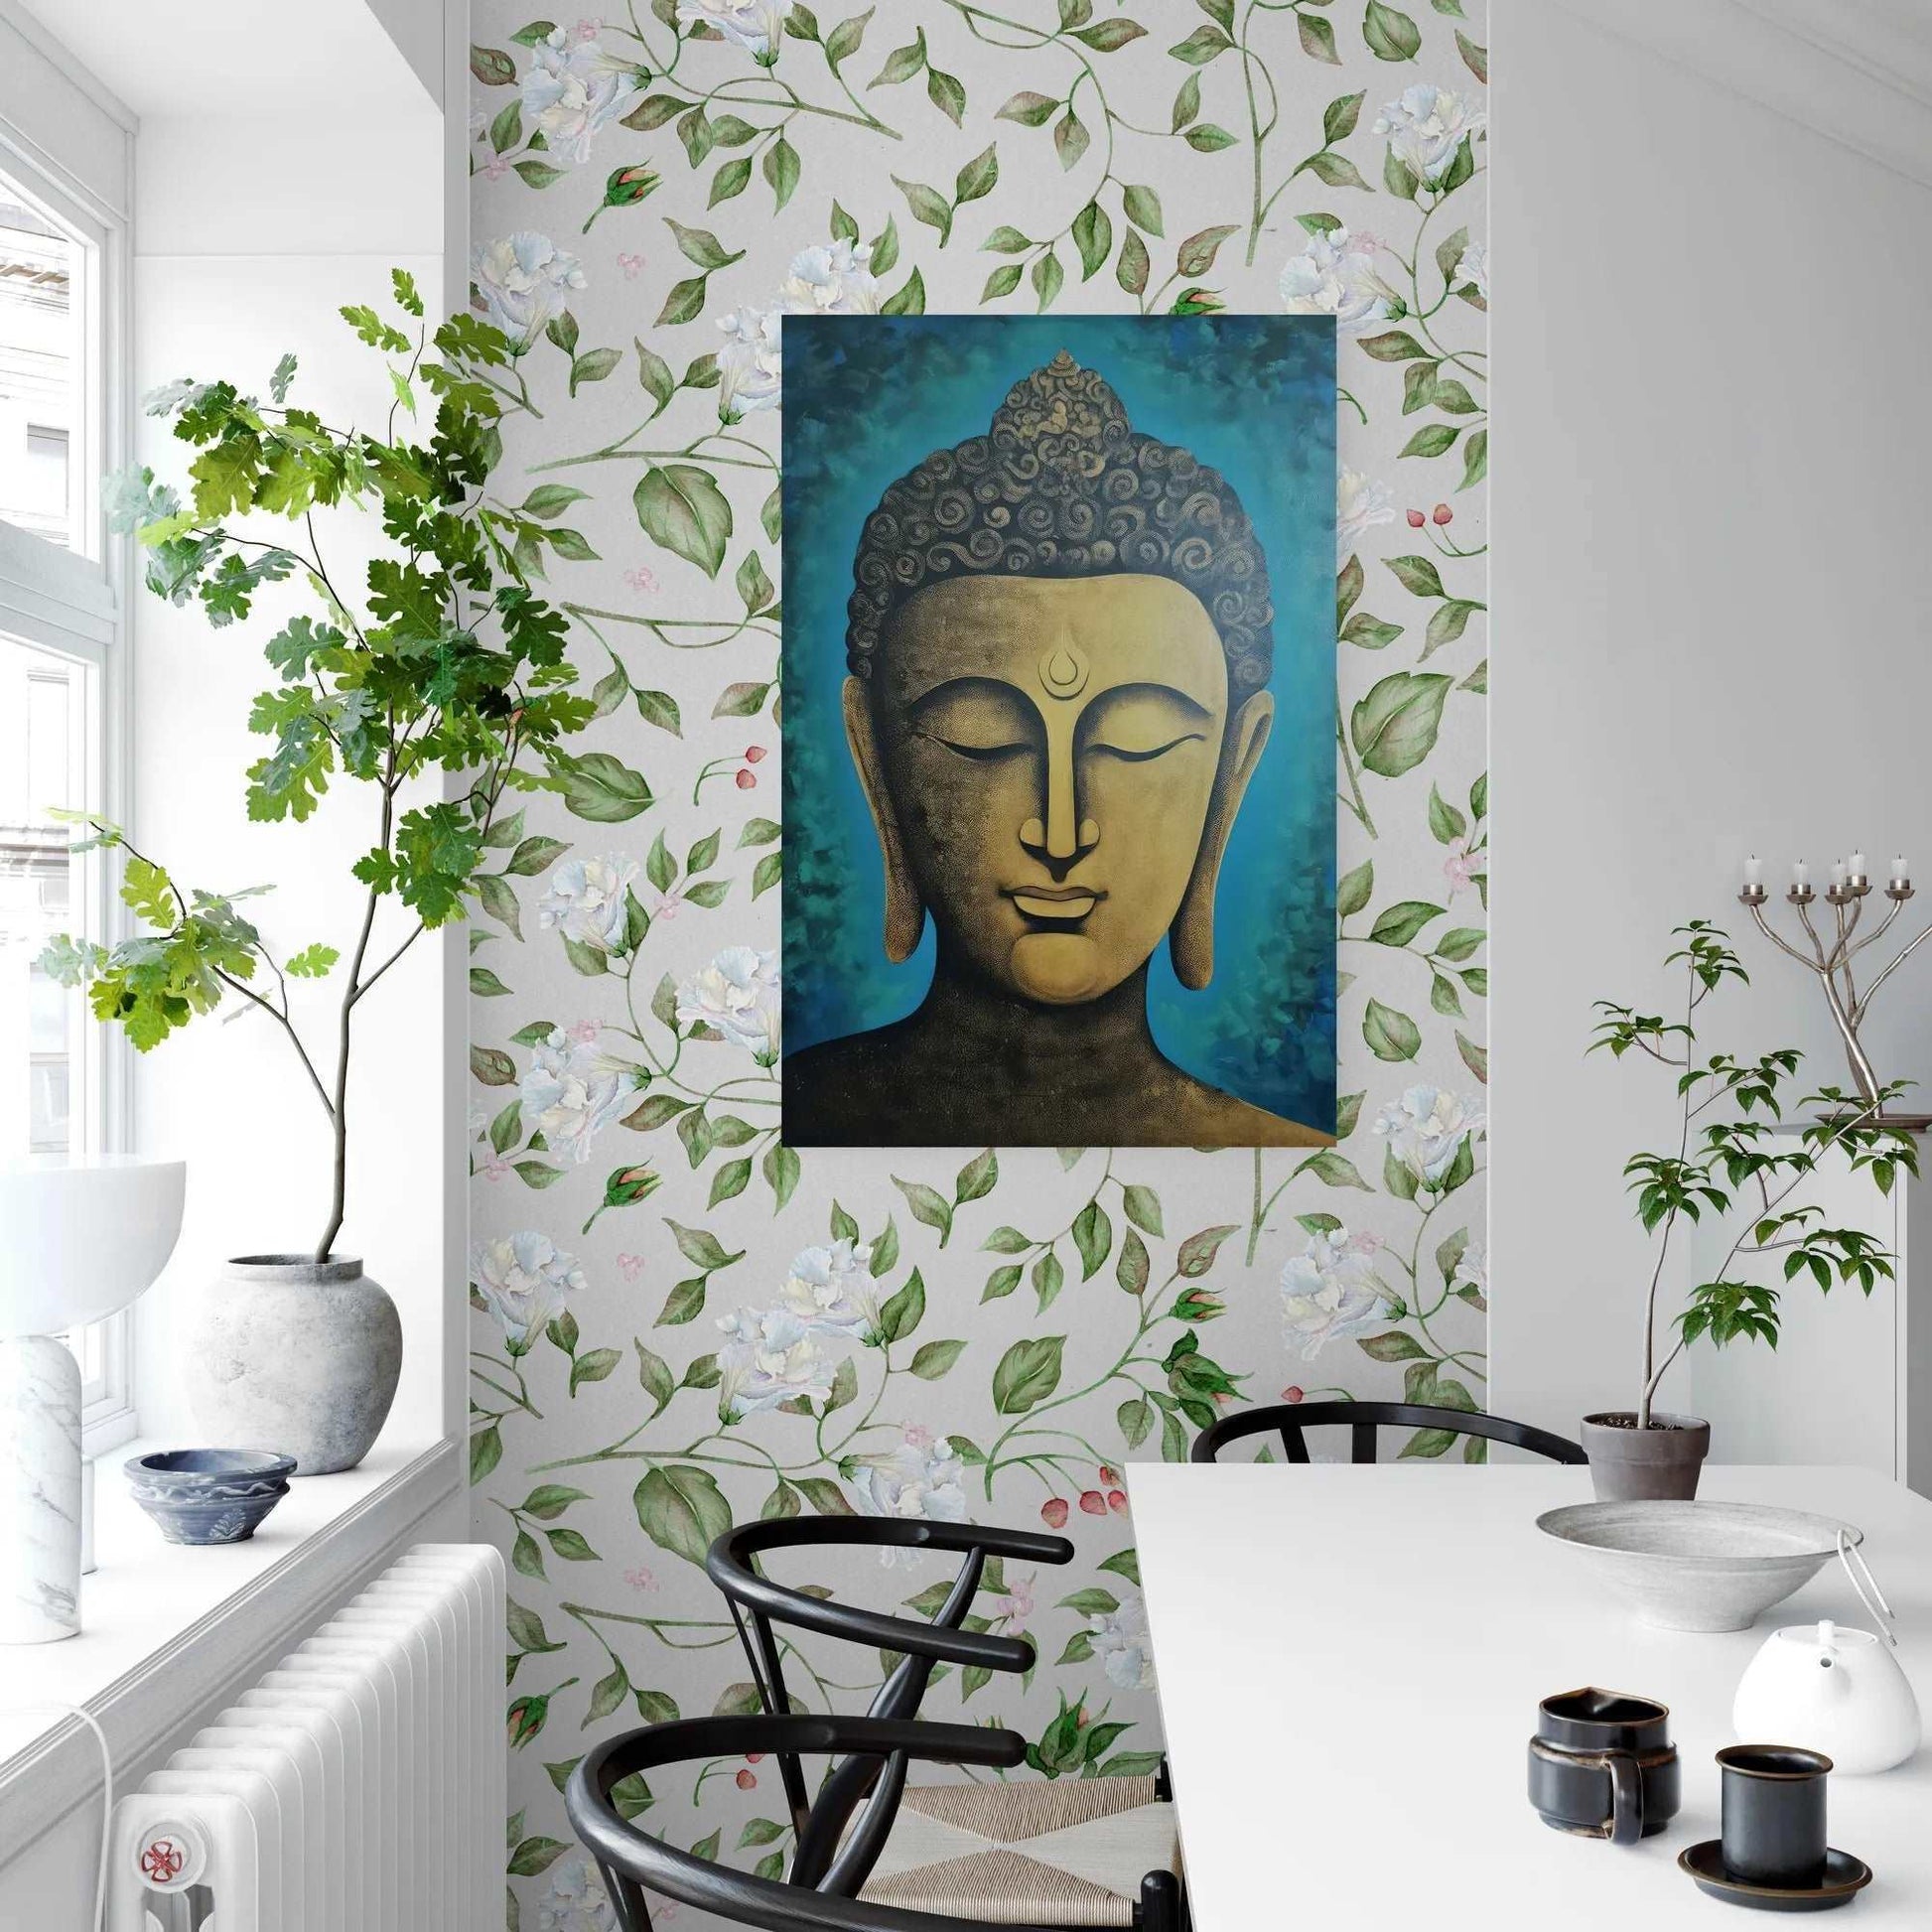 A bright dining area with floral wallpaper featuring a golden Buddha head painting, with a view of a window and greenery.